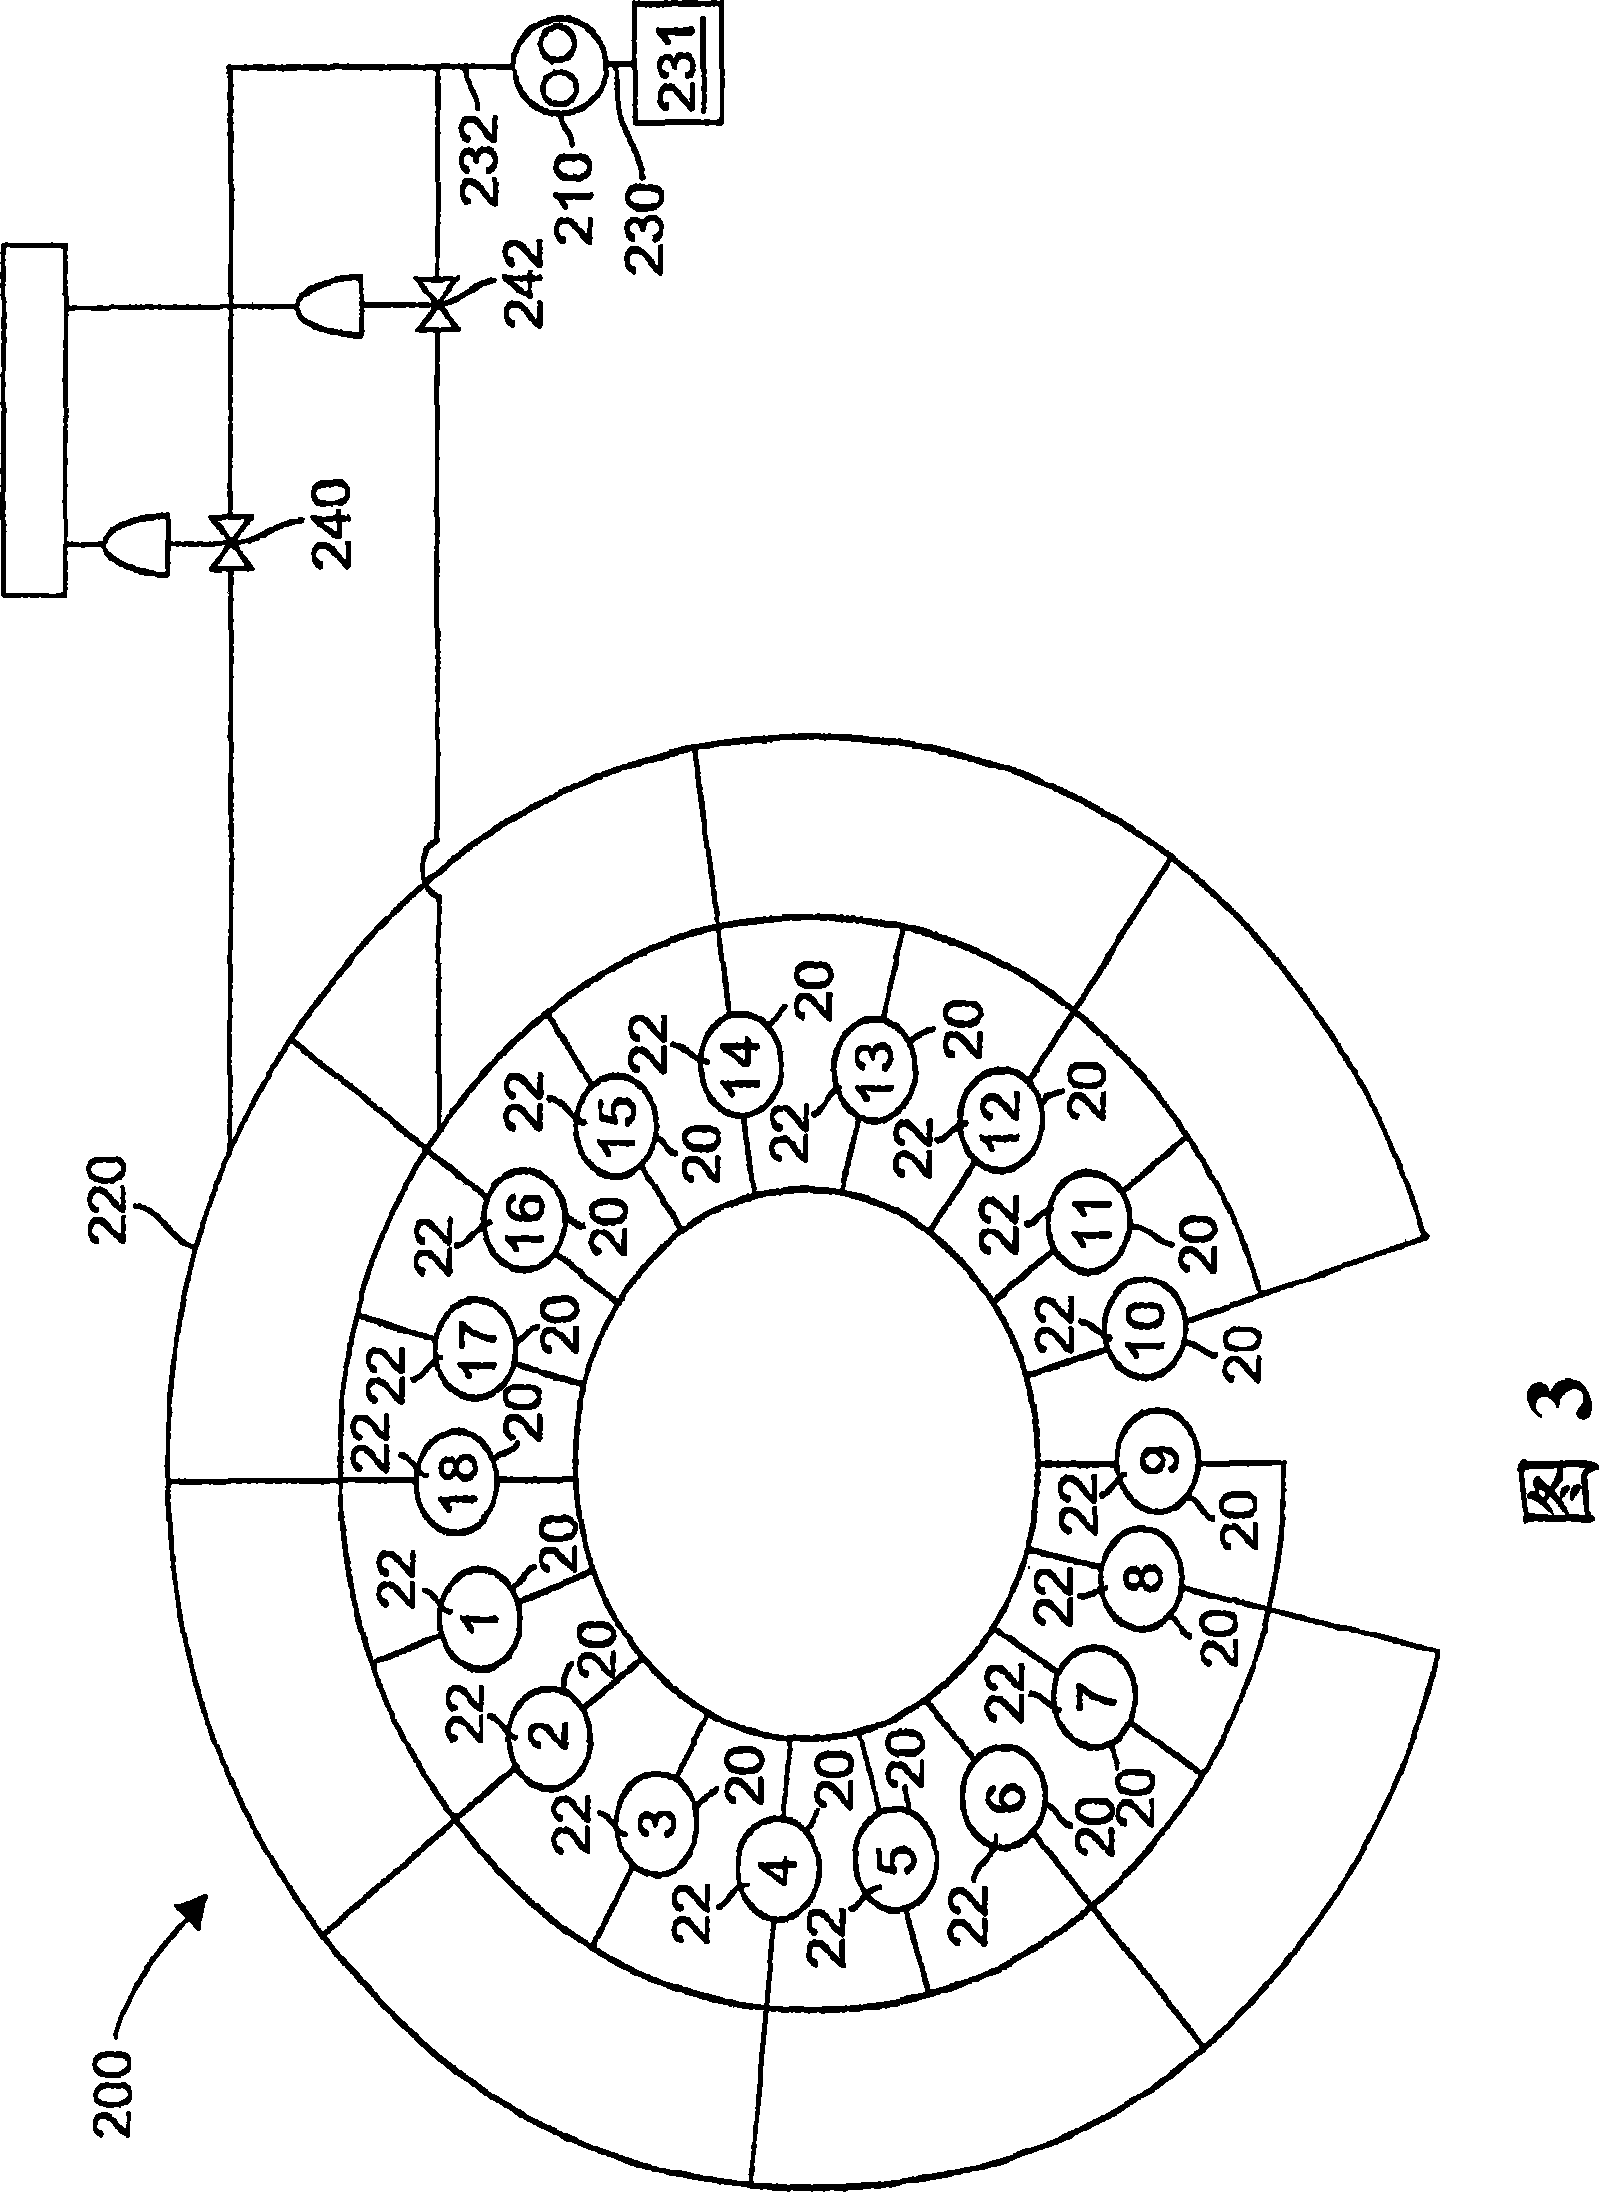 Method and system for controlling gas turbine